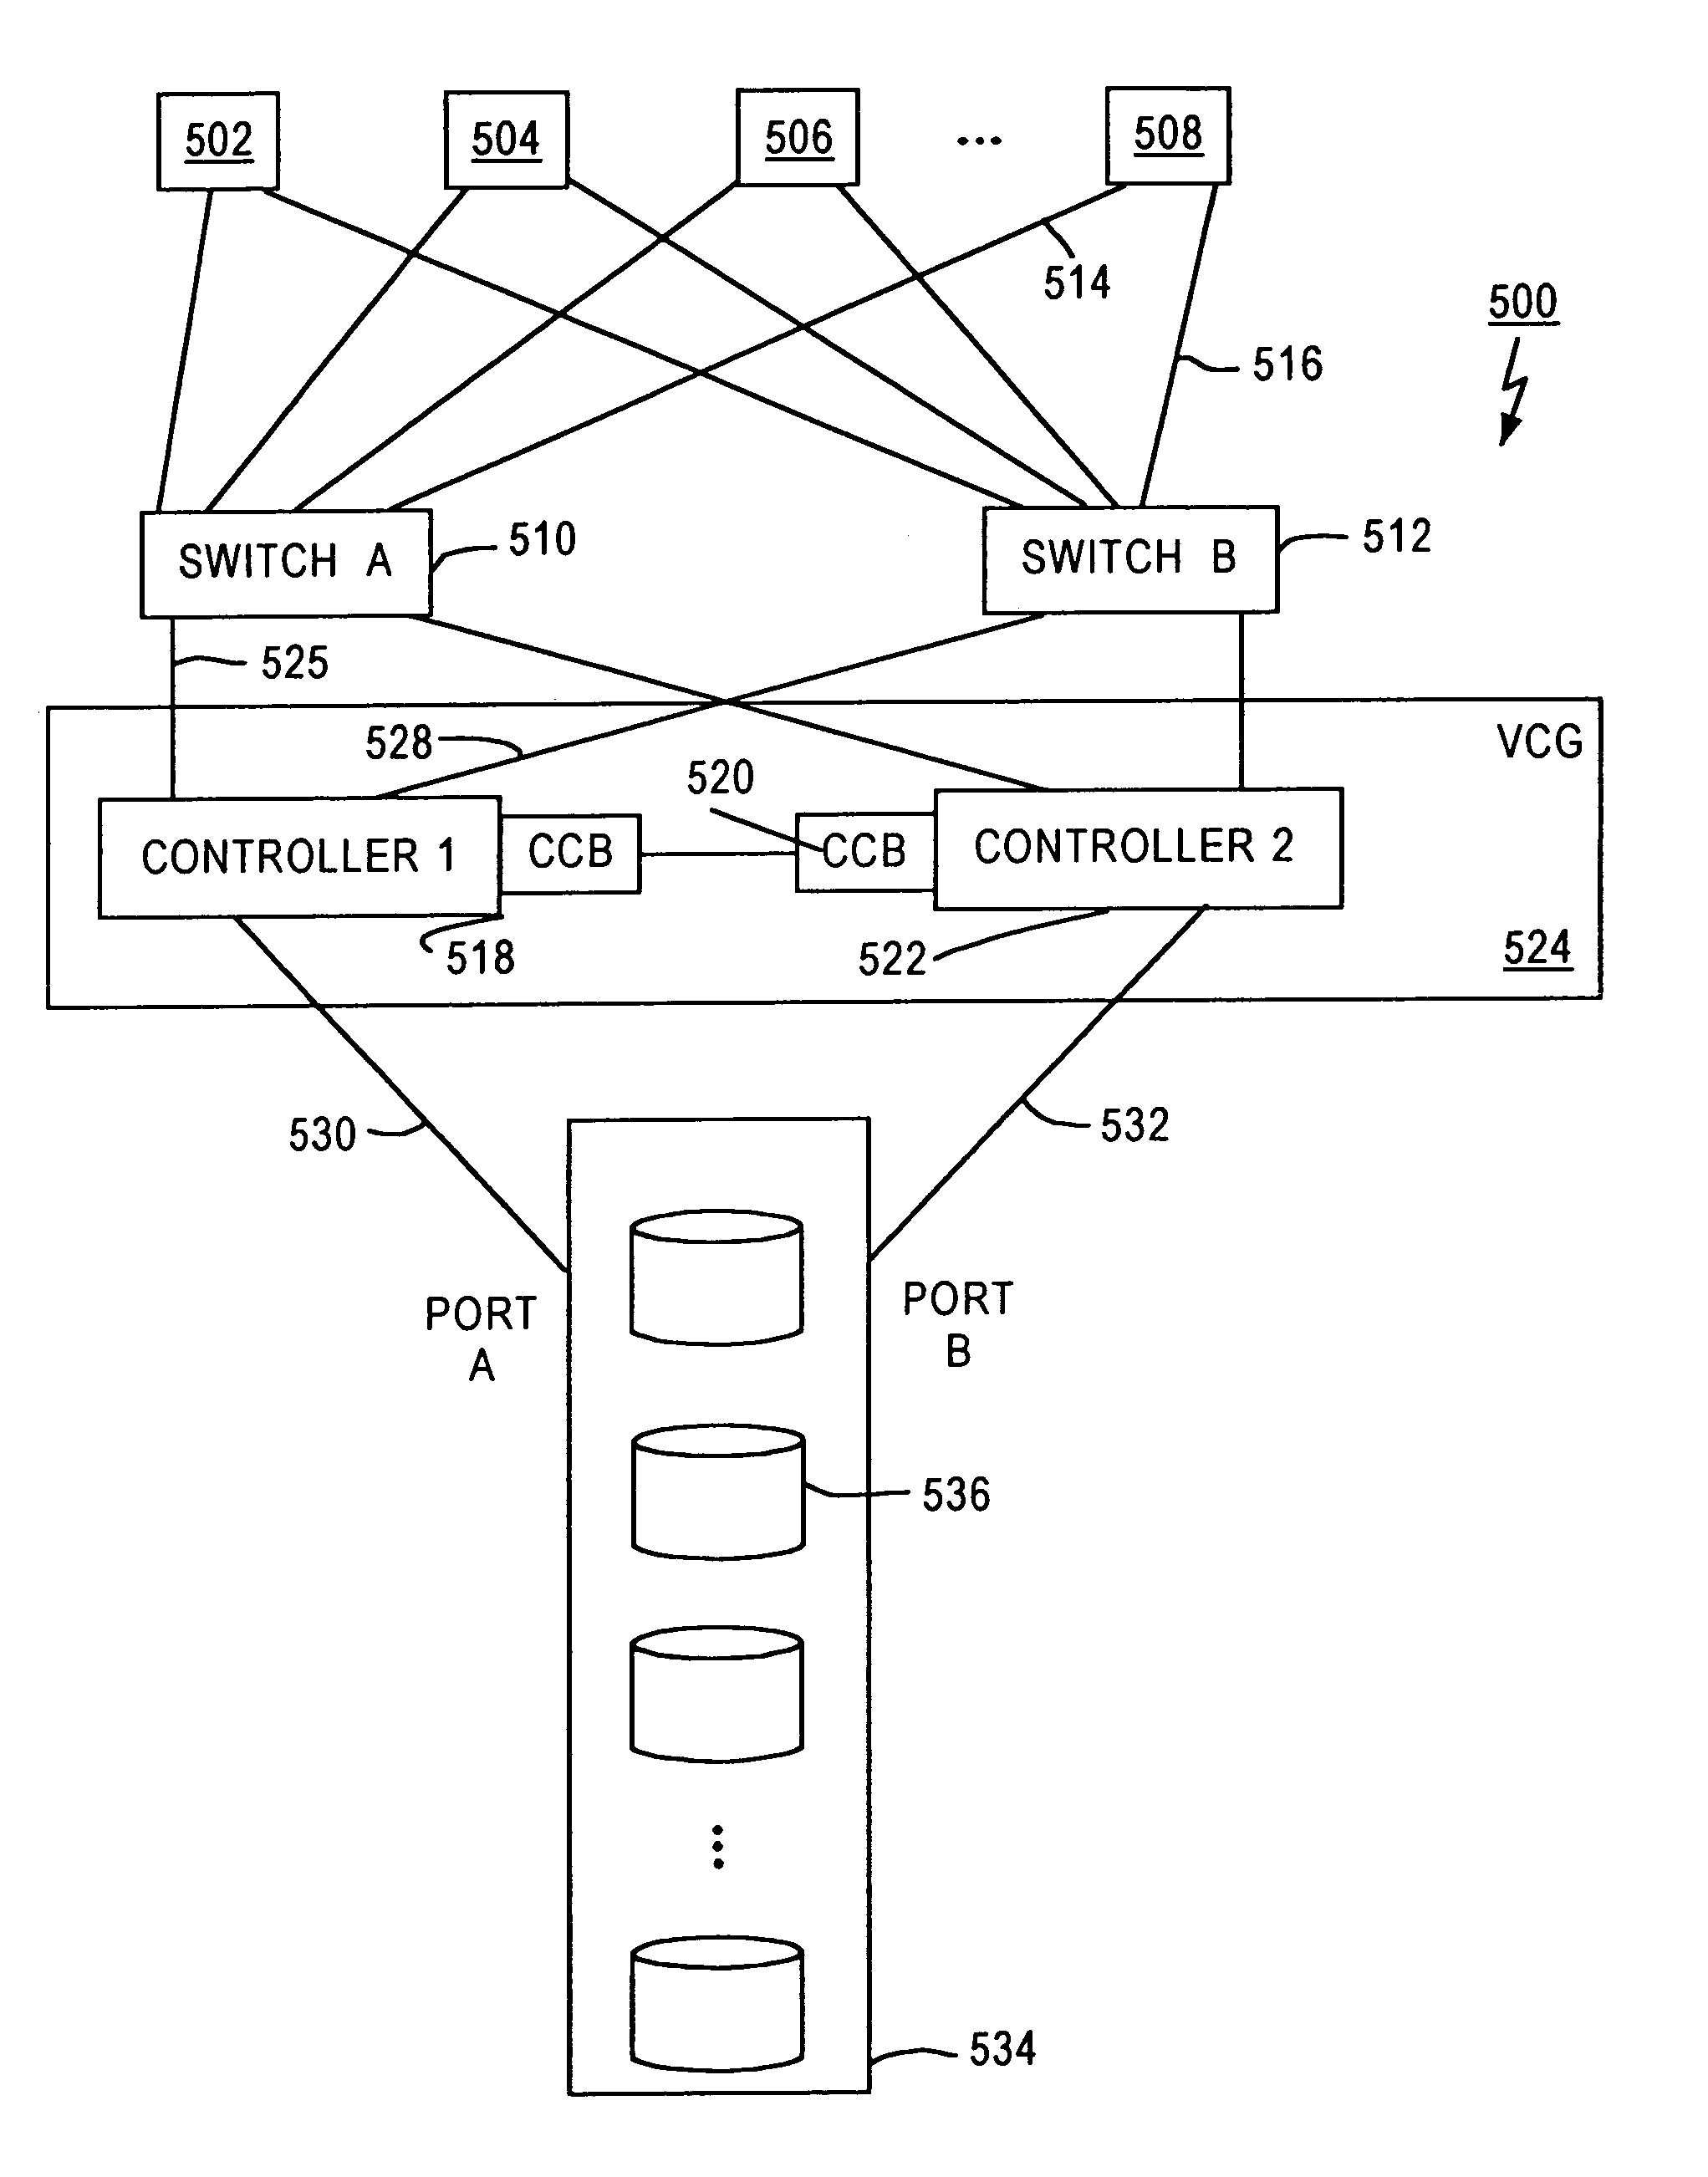 System and method to monitor and isolate faults in a storage area network